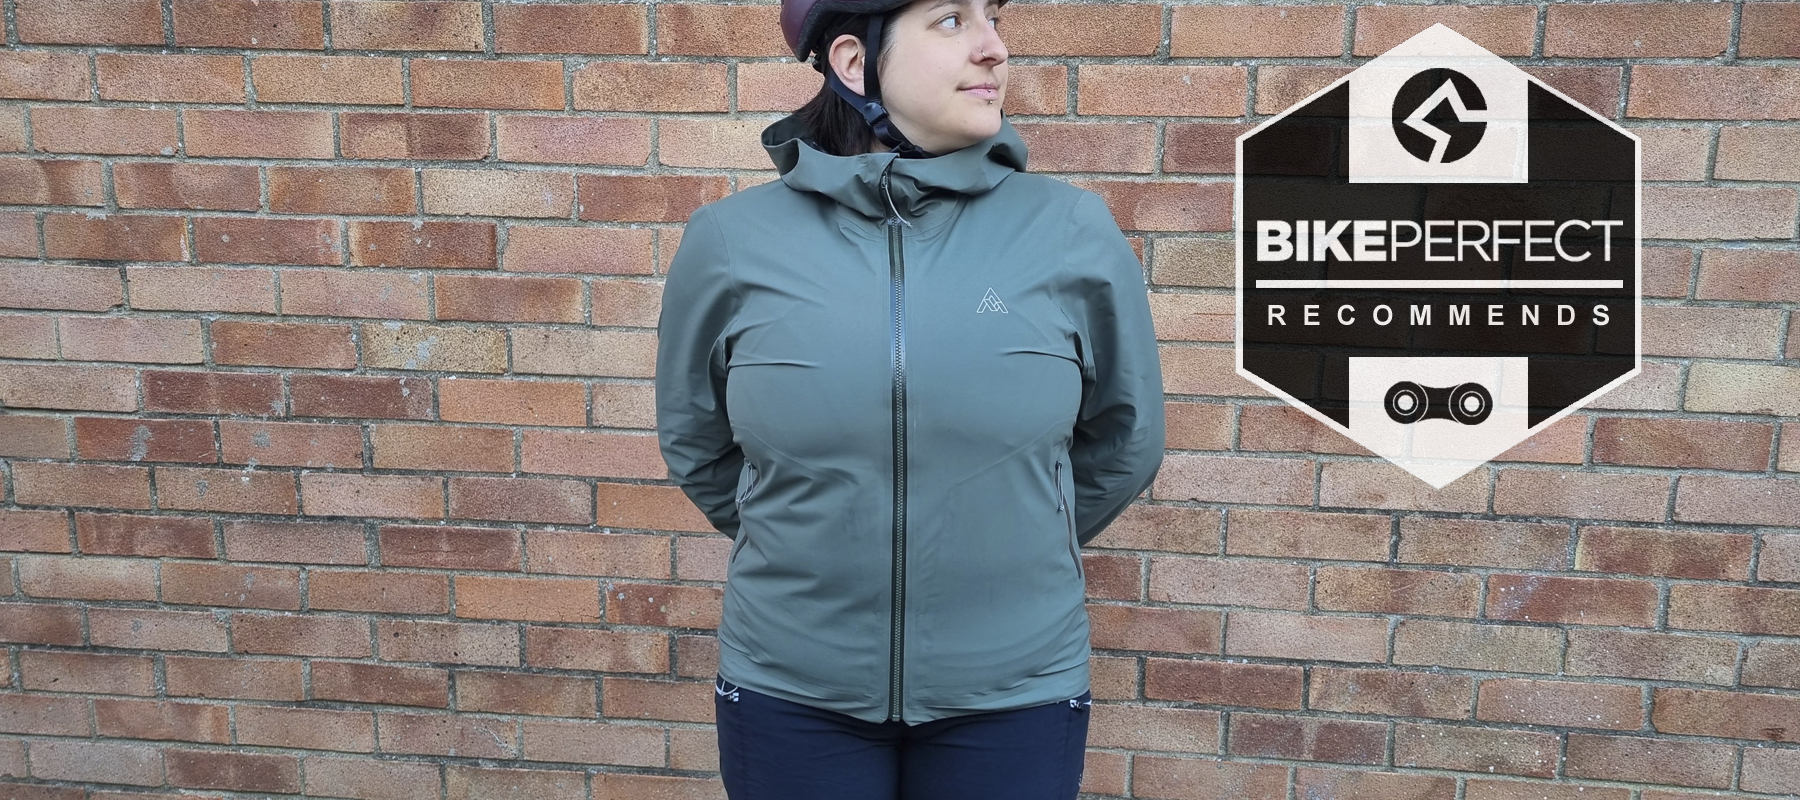 7mesh Skypilot Jacket review: packable all-weather protection